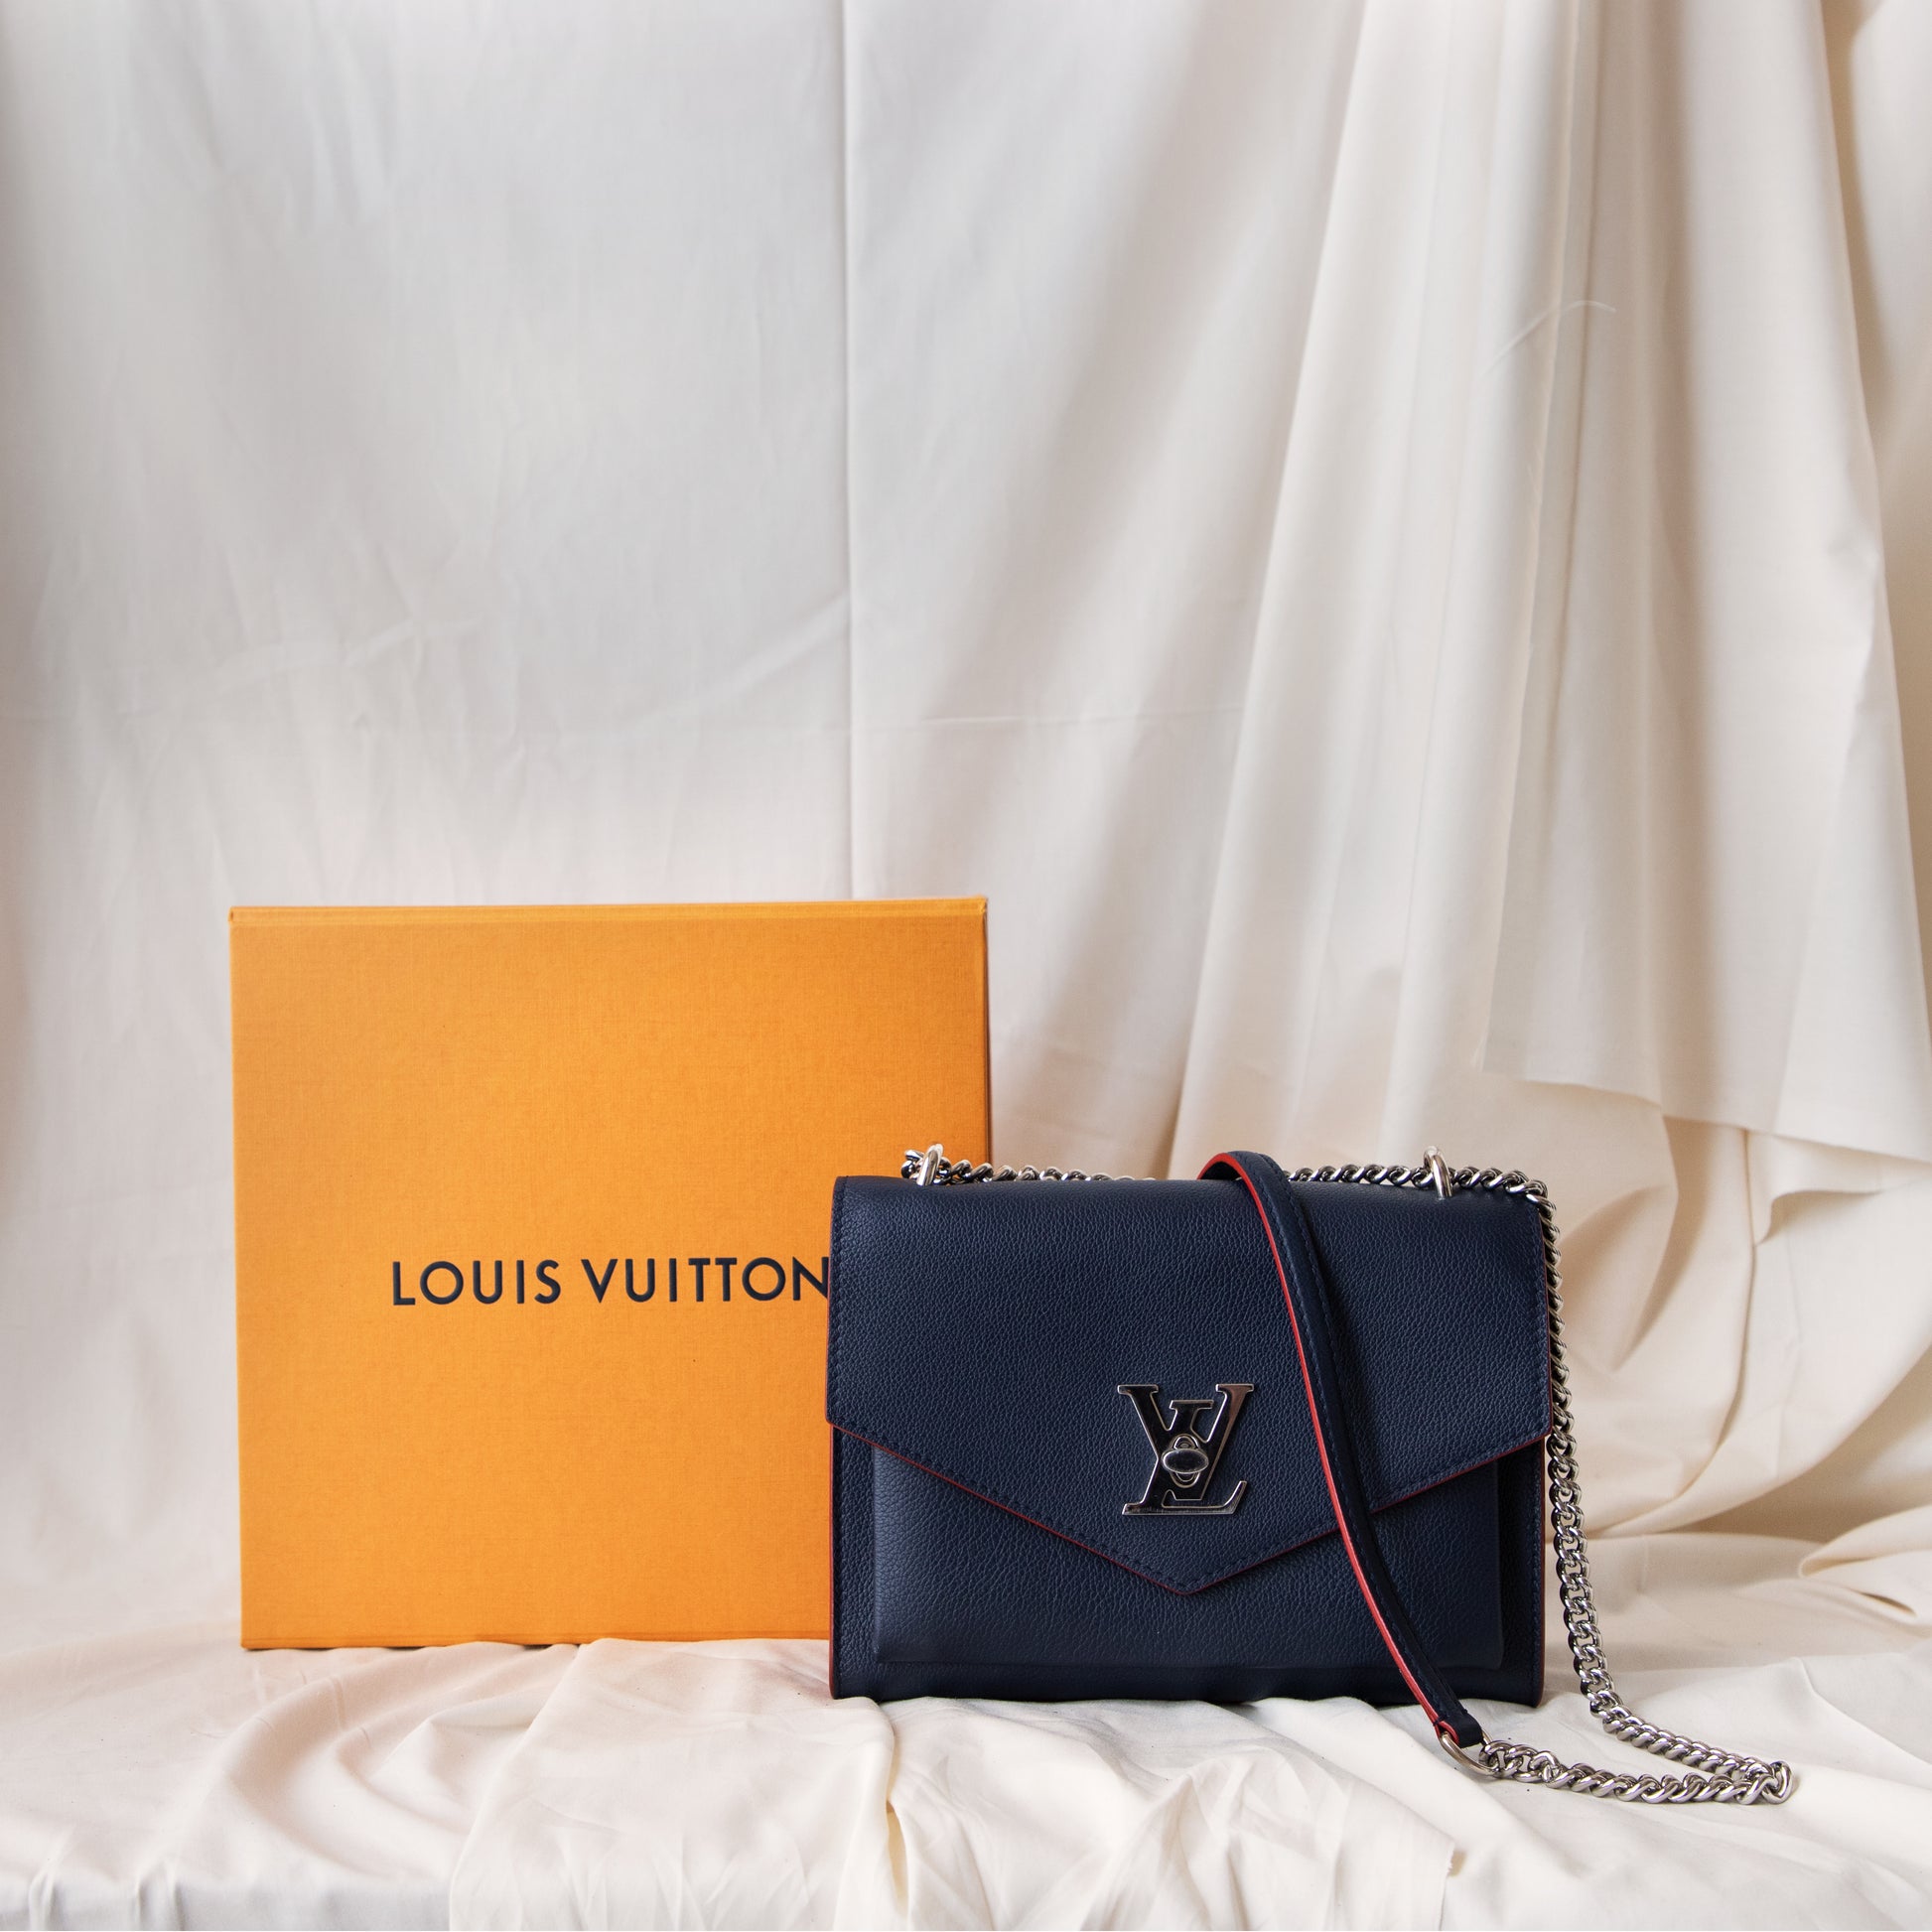 Louis Vuitton Mylockme Chain Bag in Red